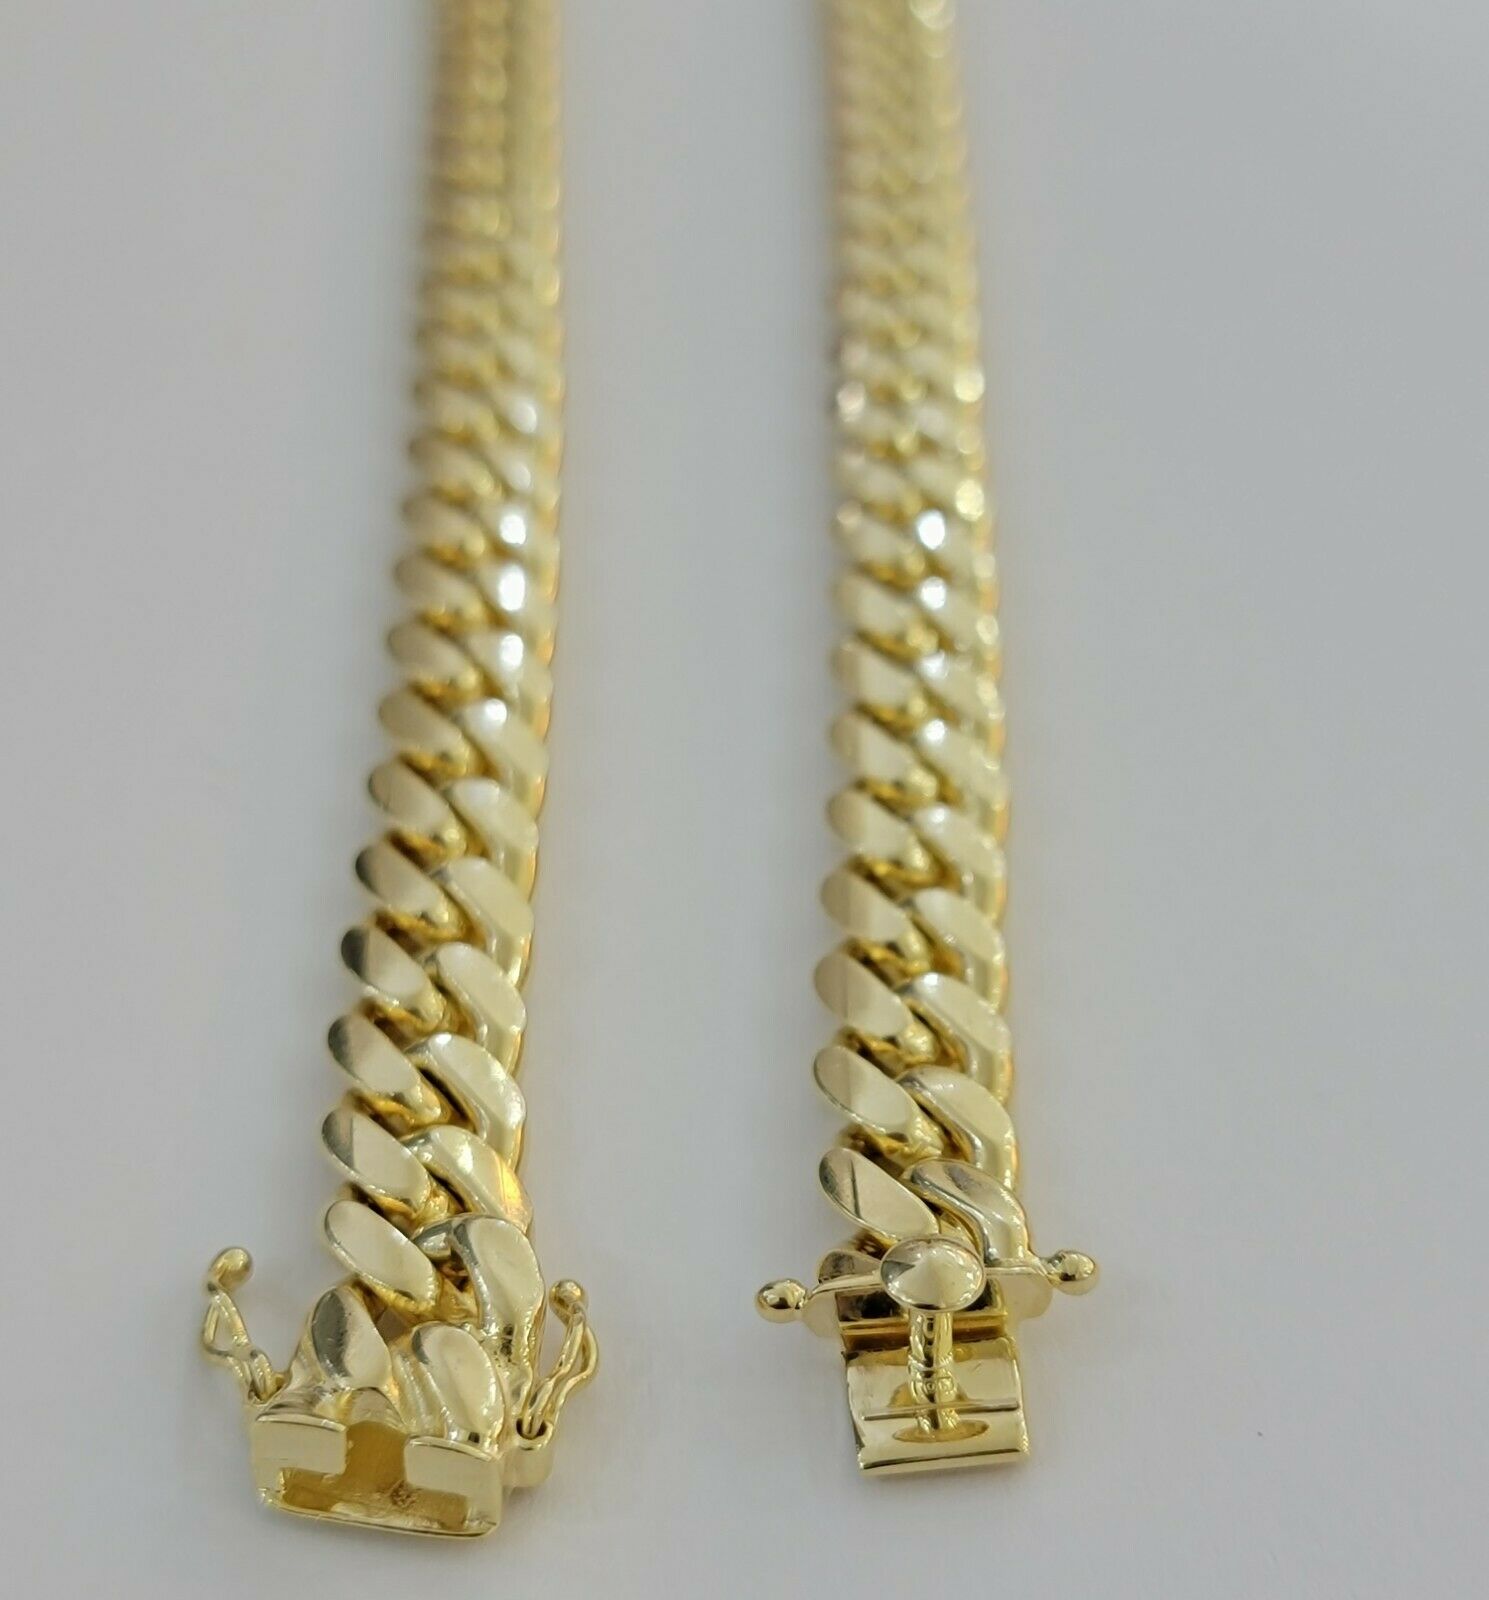 Solid 10k Gold Chain 10mm Miami Cuban Link Necklace 24" Men's Box Lock REAL 10kt